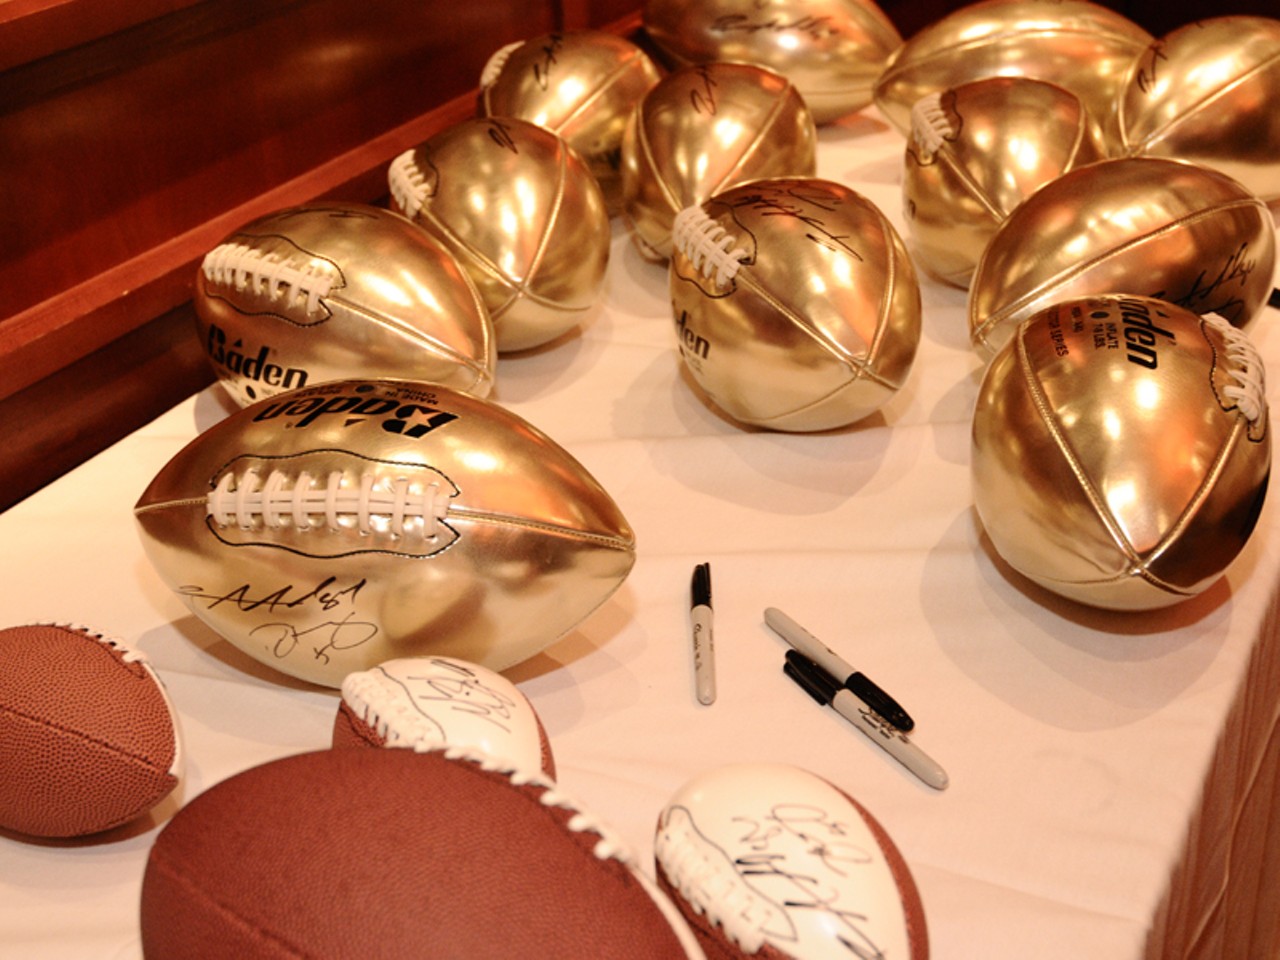 Why have a regular old football when you can have a golden football?